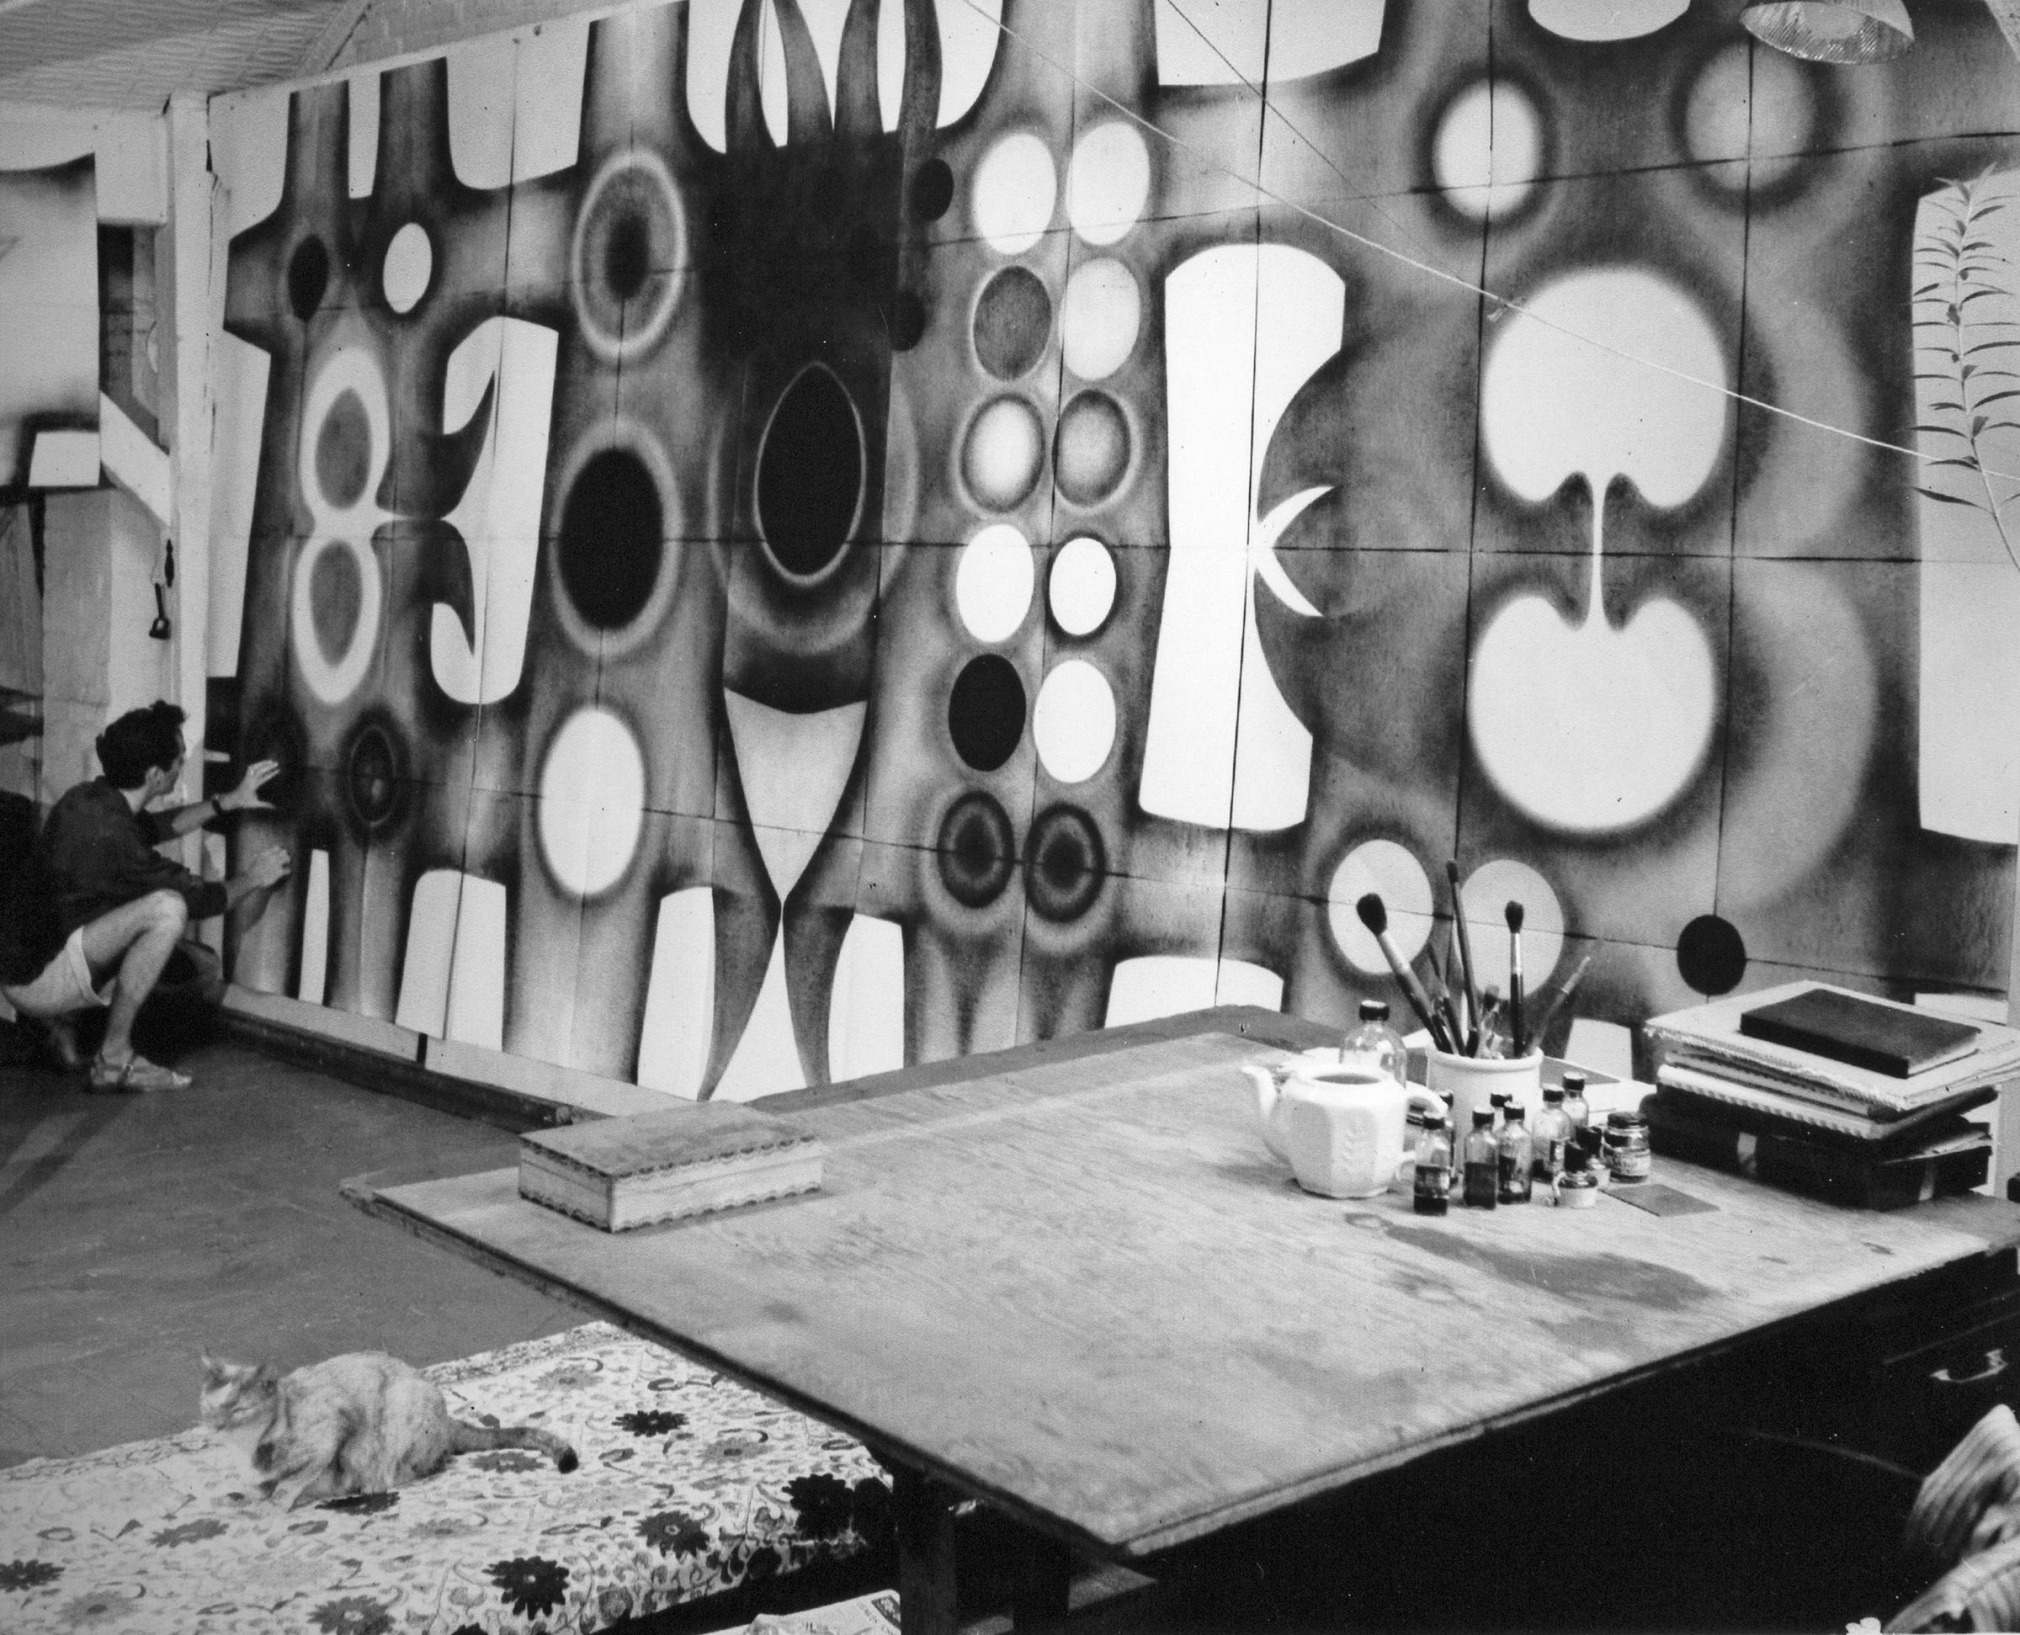 Indiana working on Stavrosis in his studio, ca. 1958